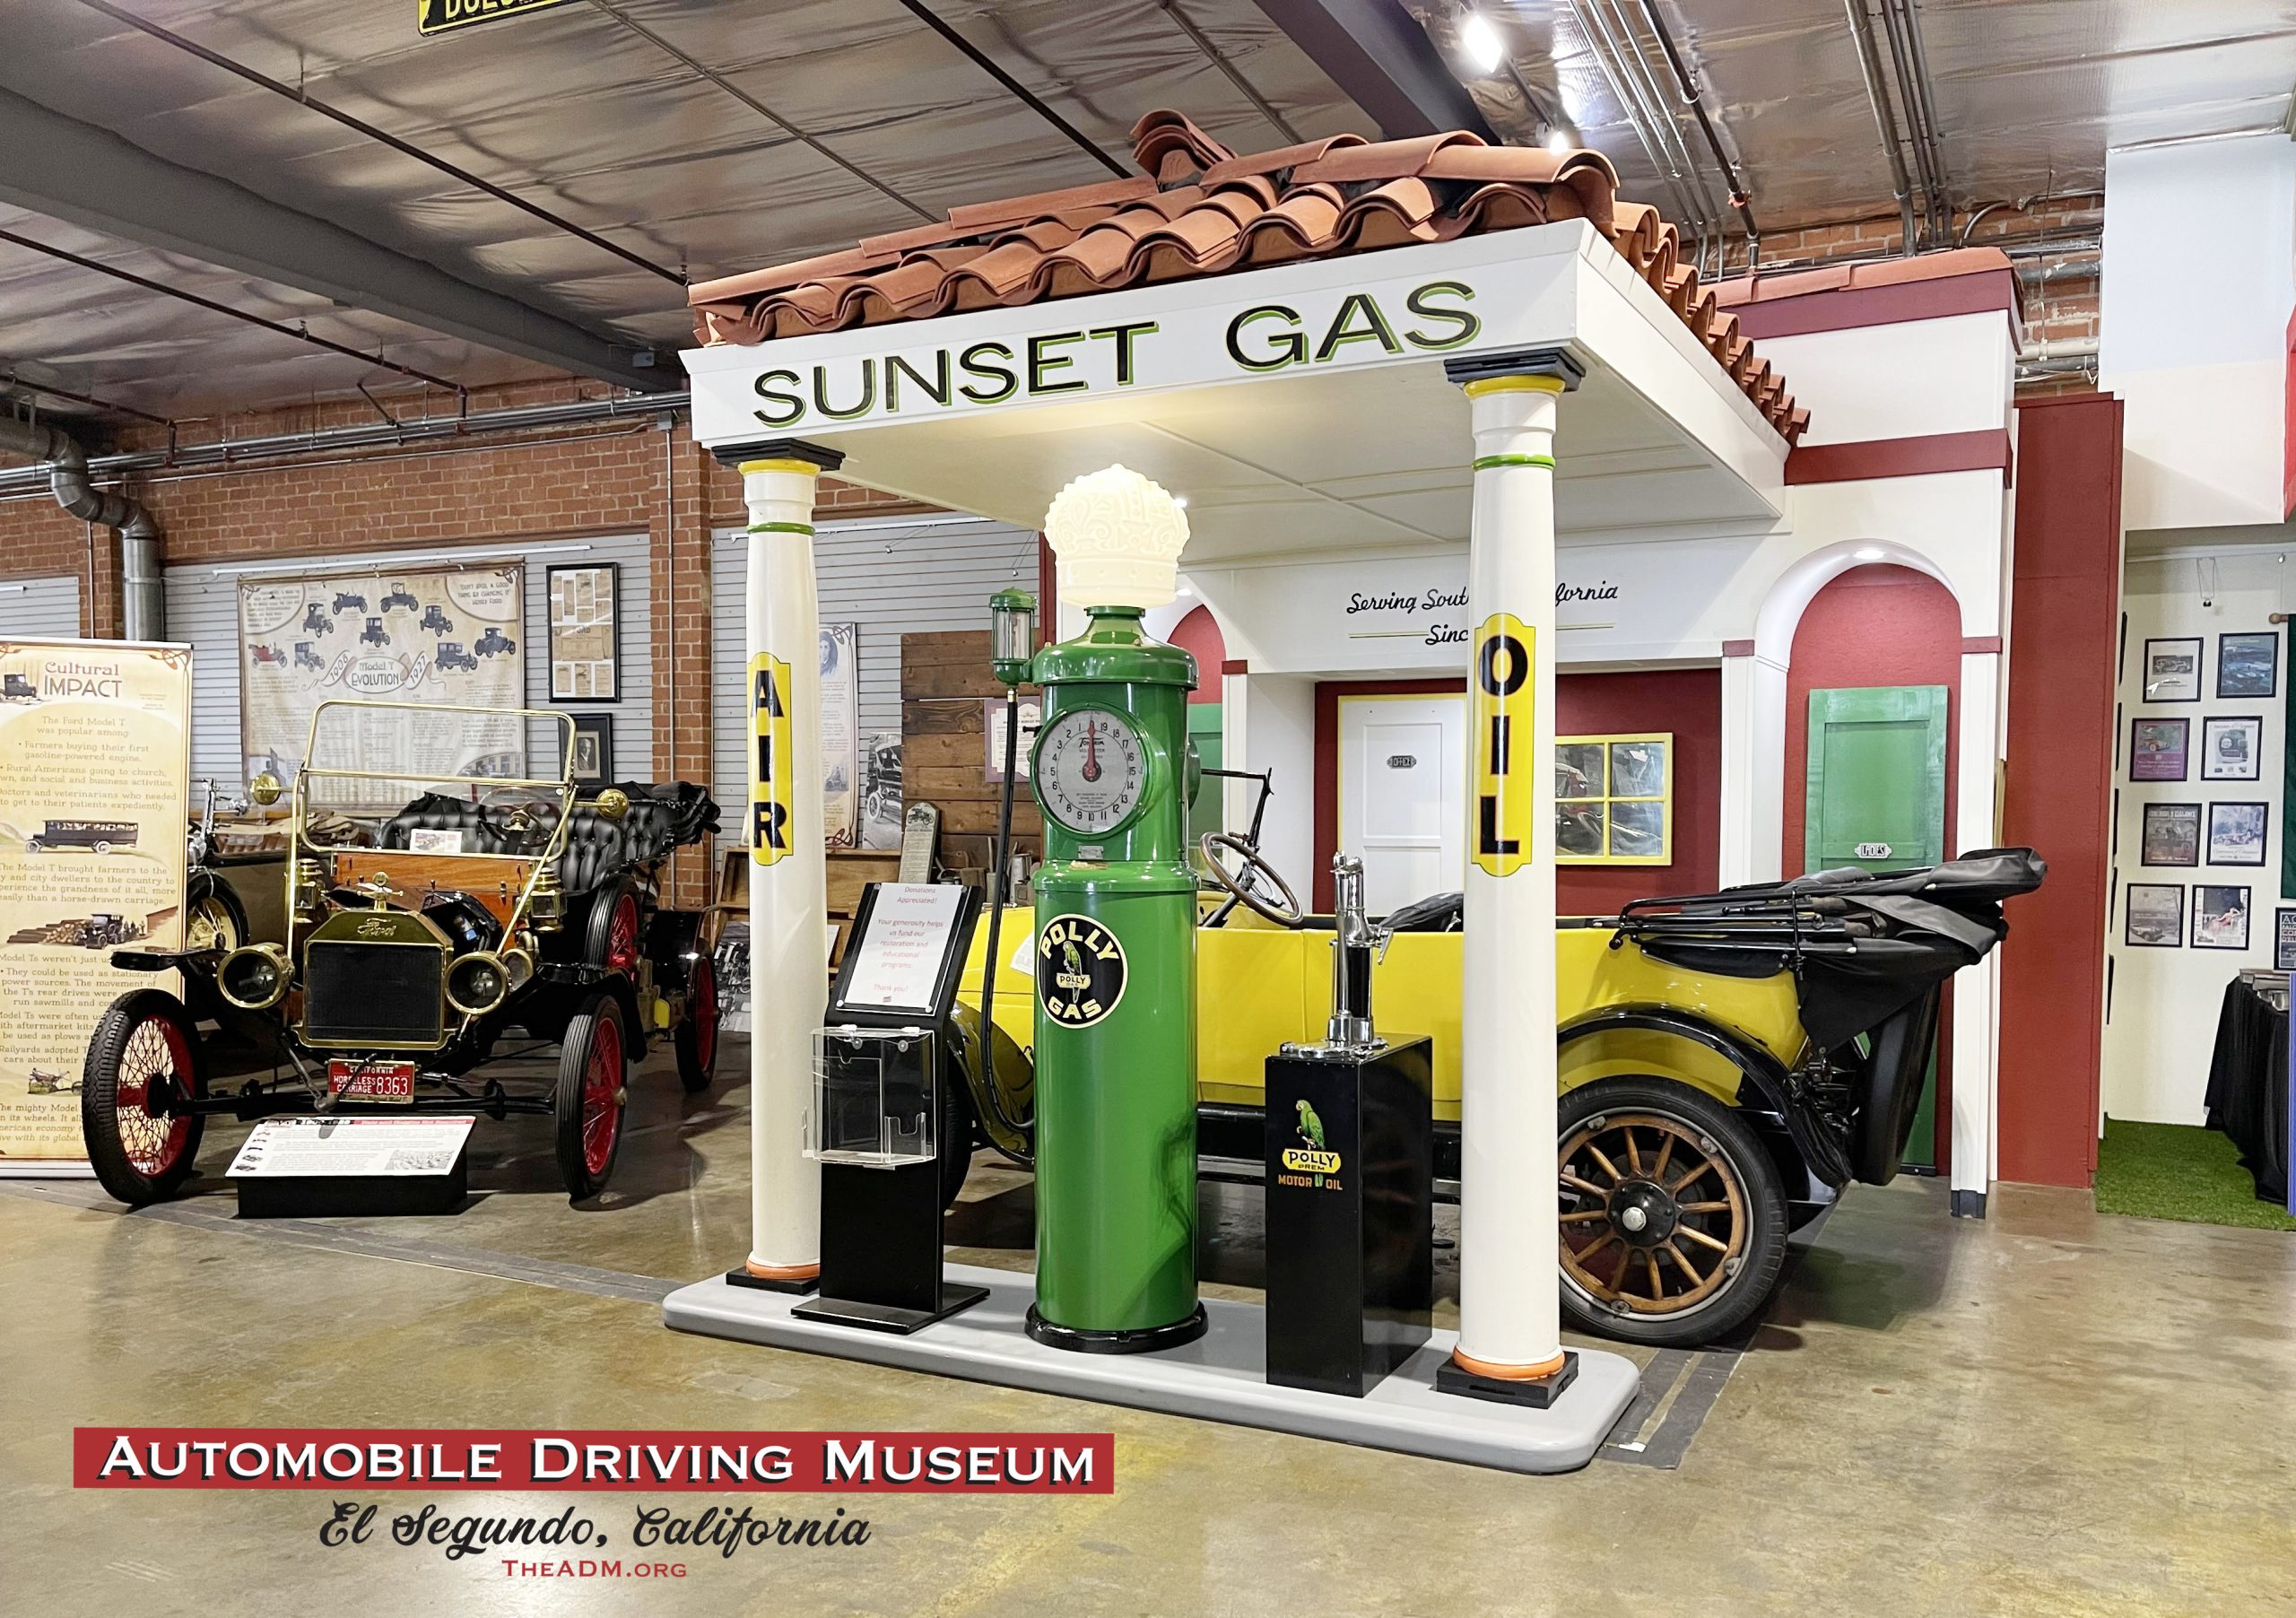 Sunset Gas Station at the ADM - Automobile Driving Museum